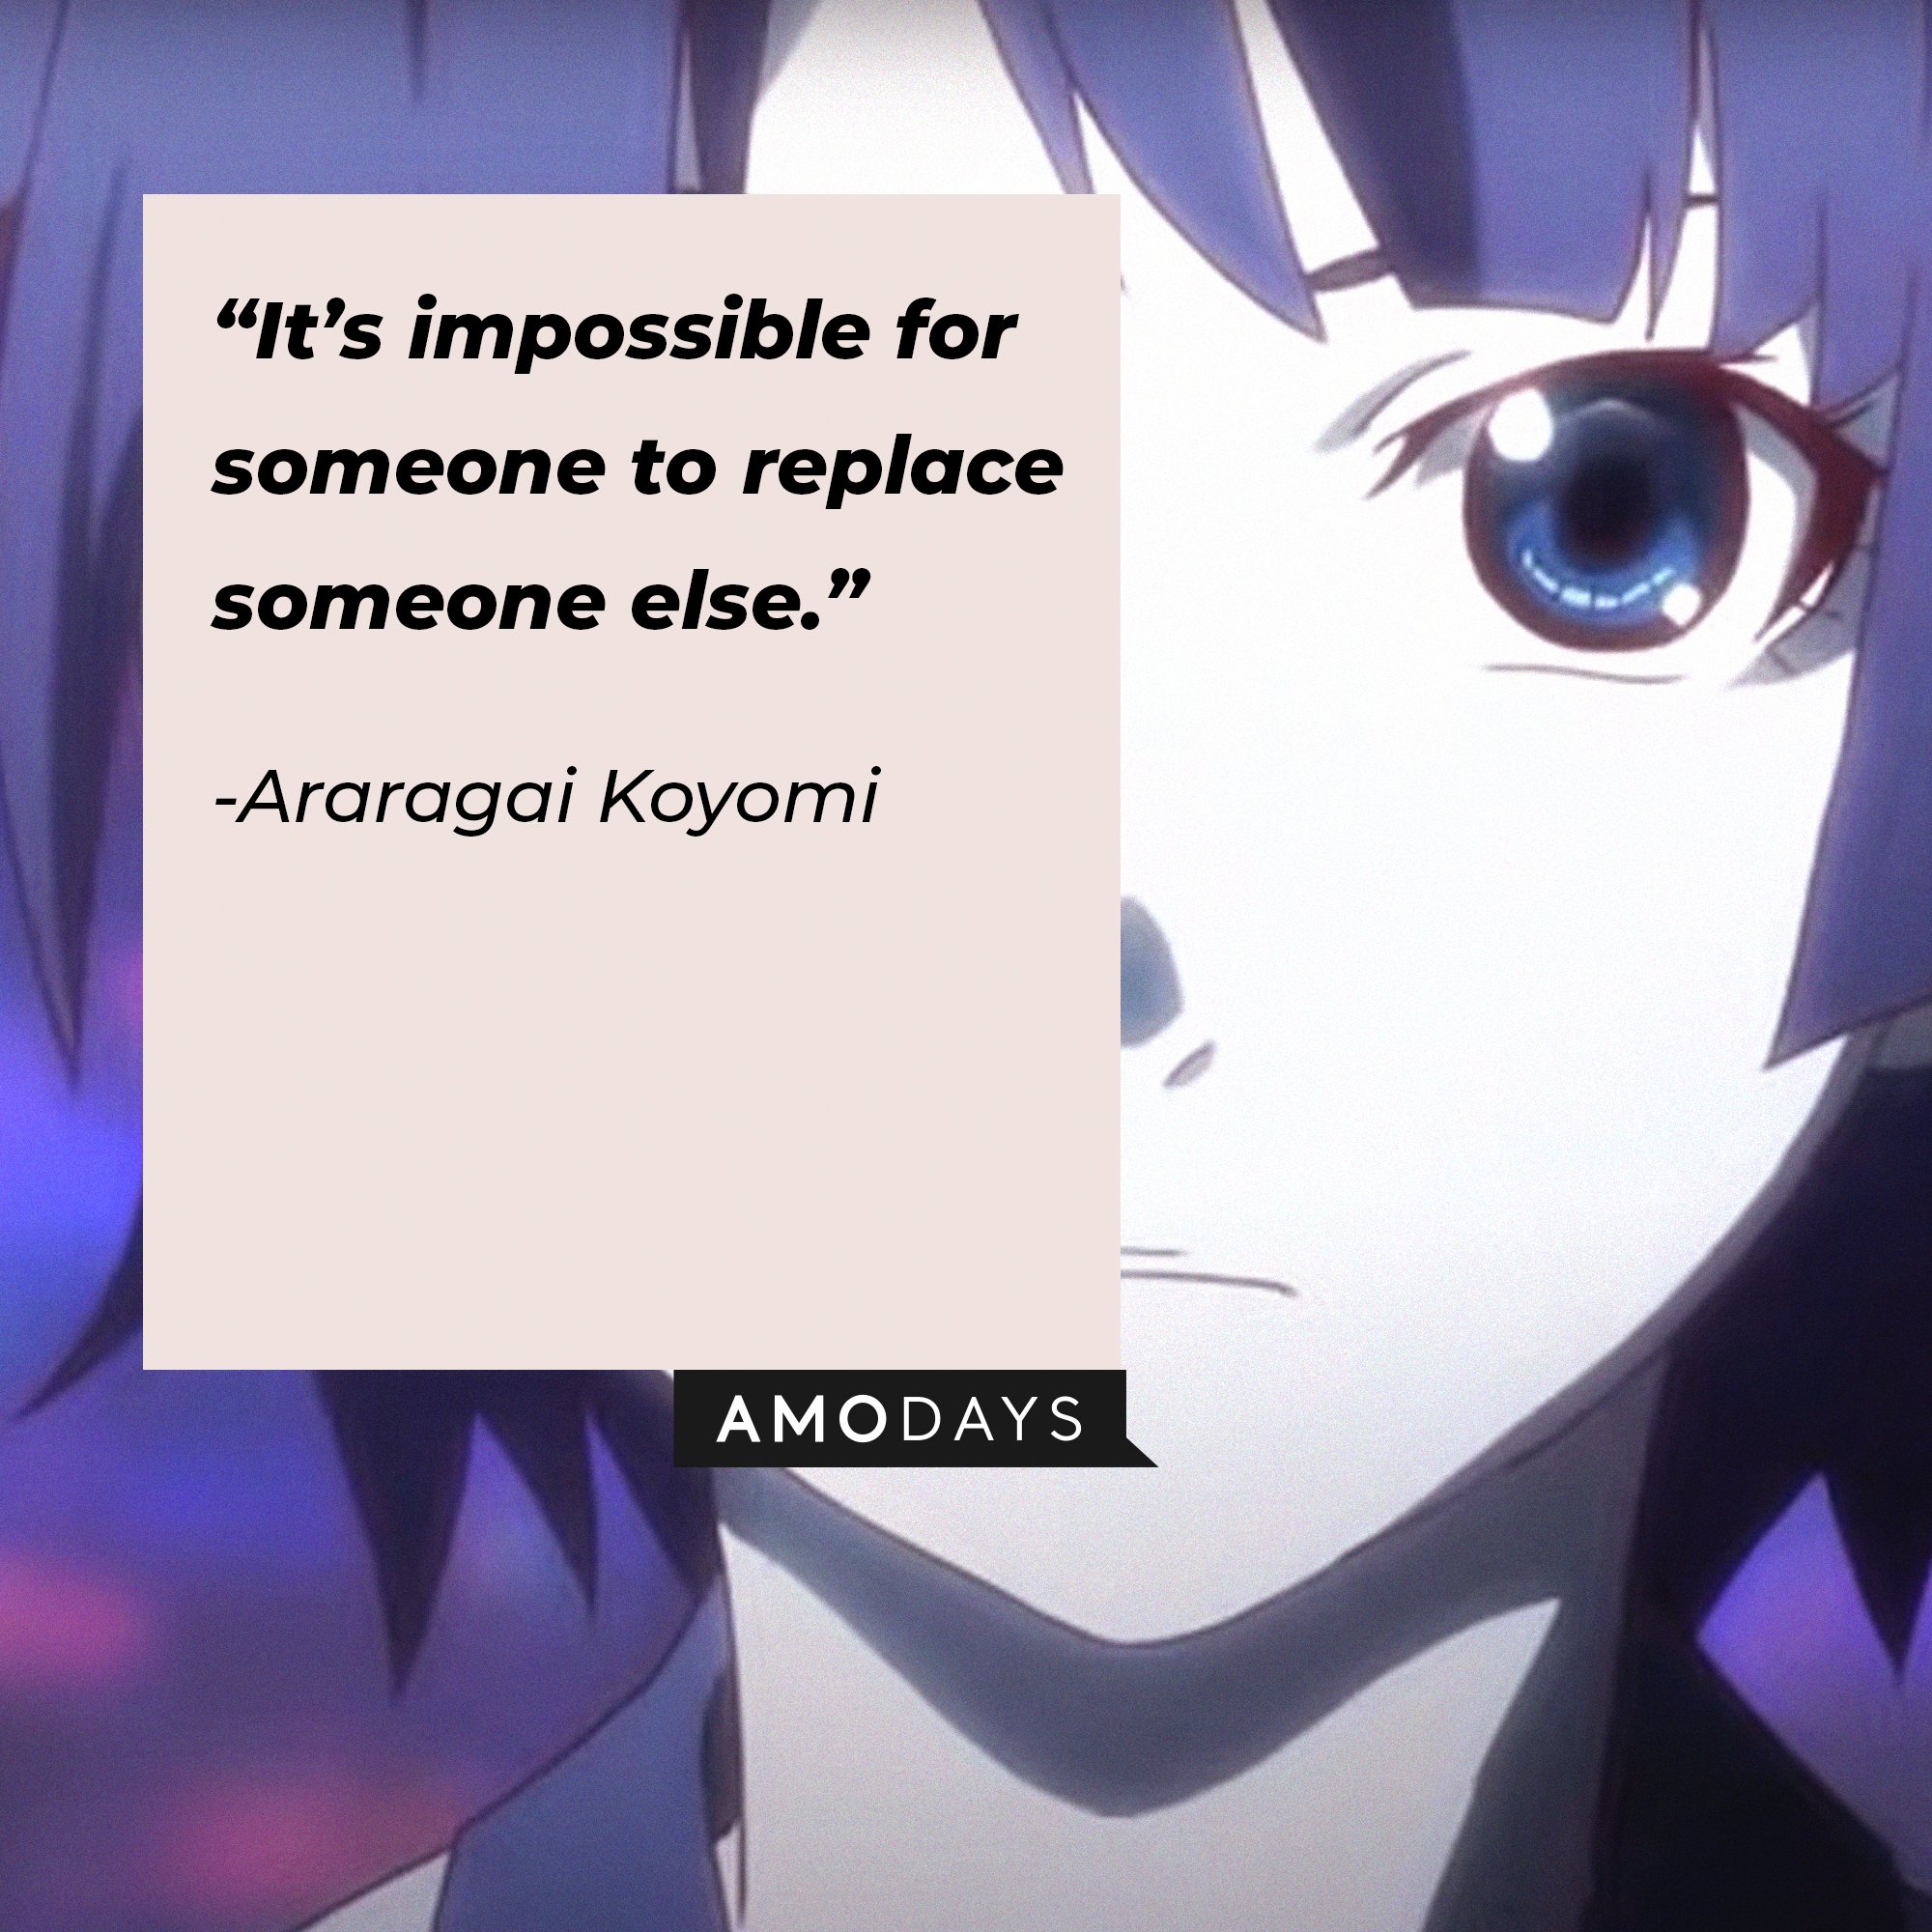 Araragai Koyomi’s quote: "It's impossible for someone to replace someone else." | Image: AmoDays 